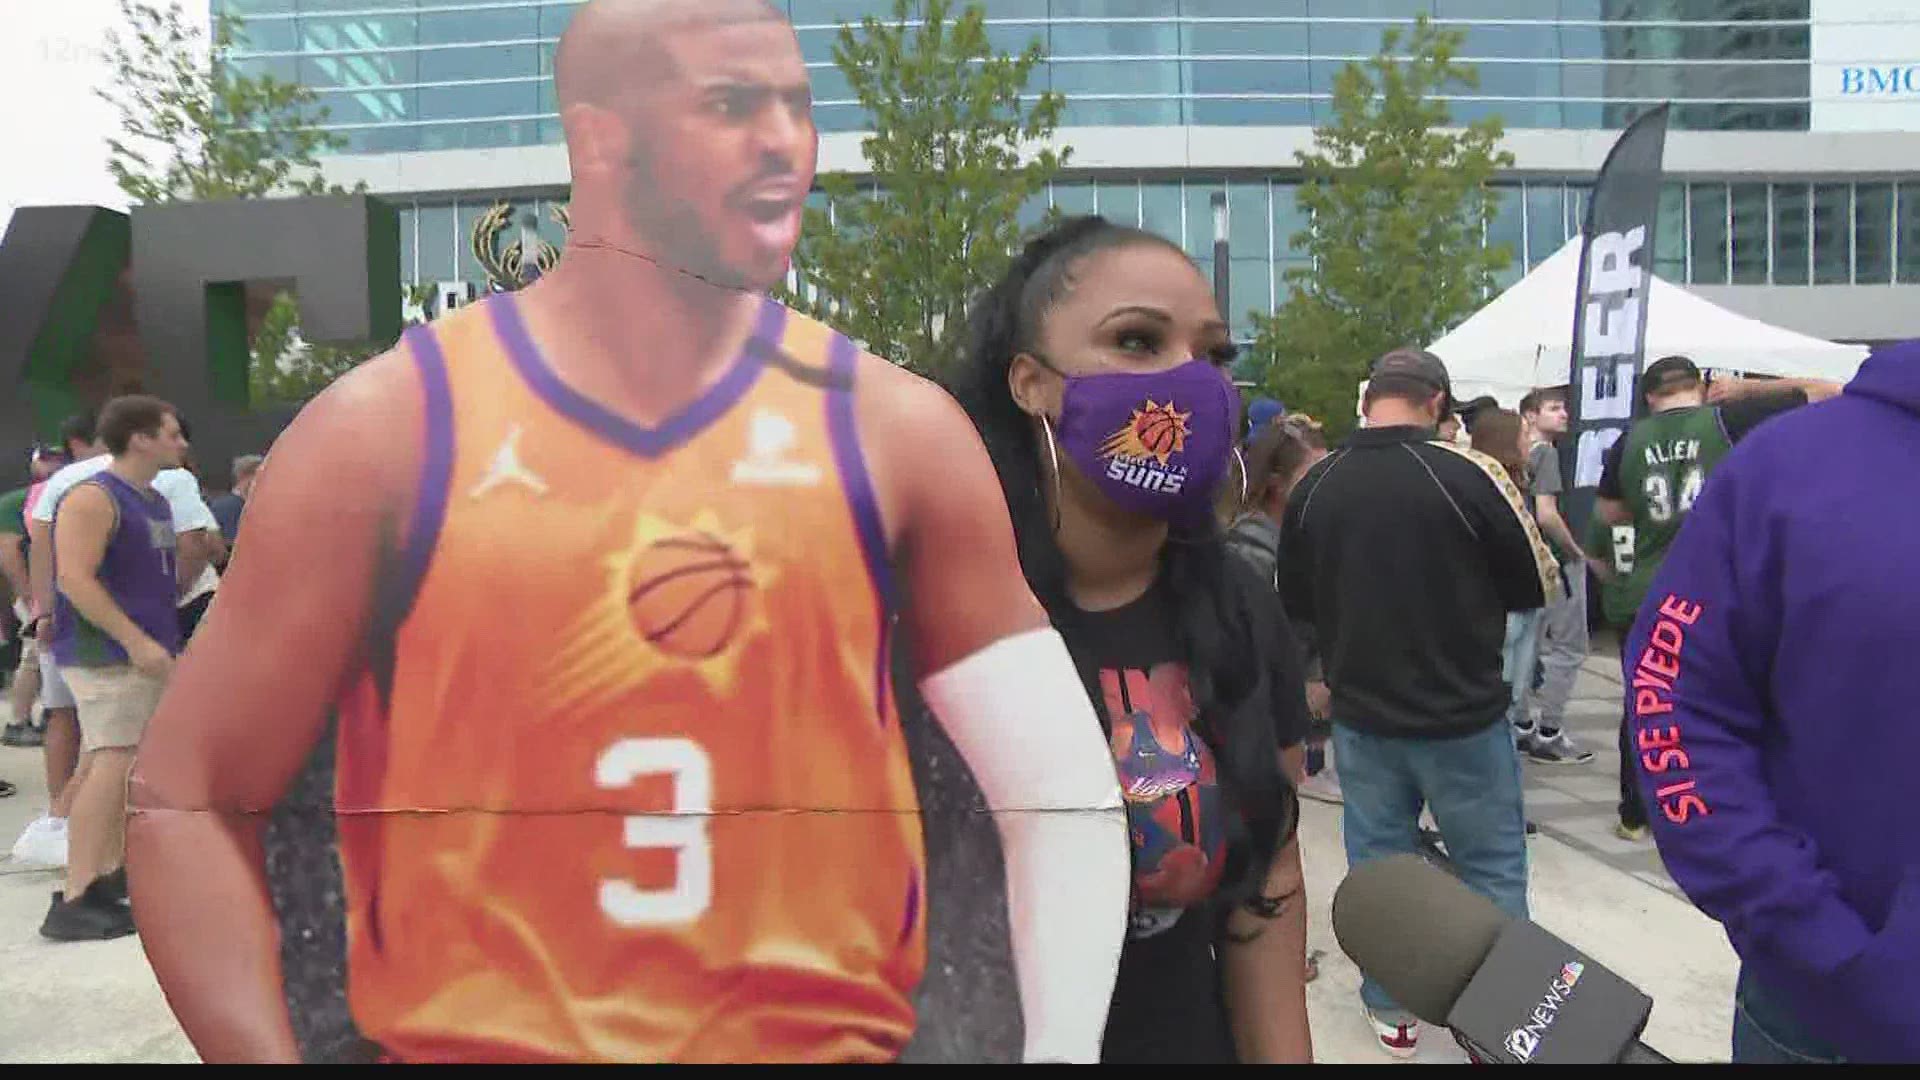 Team 12's Chierstin Susel met a woman who is possibly Chris Paul's biggest fan outside Game 4 of the NBA Finals. The super-fan says she's spent $16,000 on tickets.